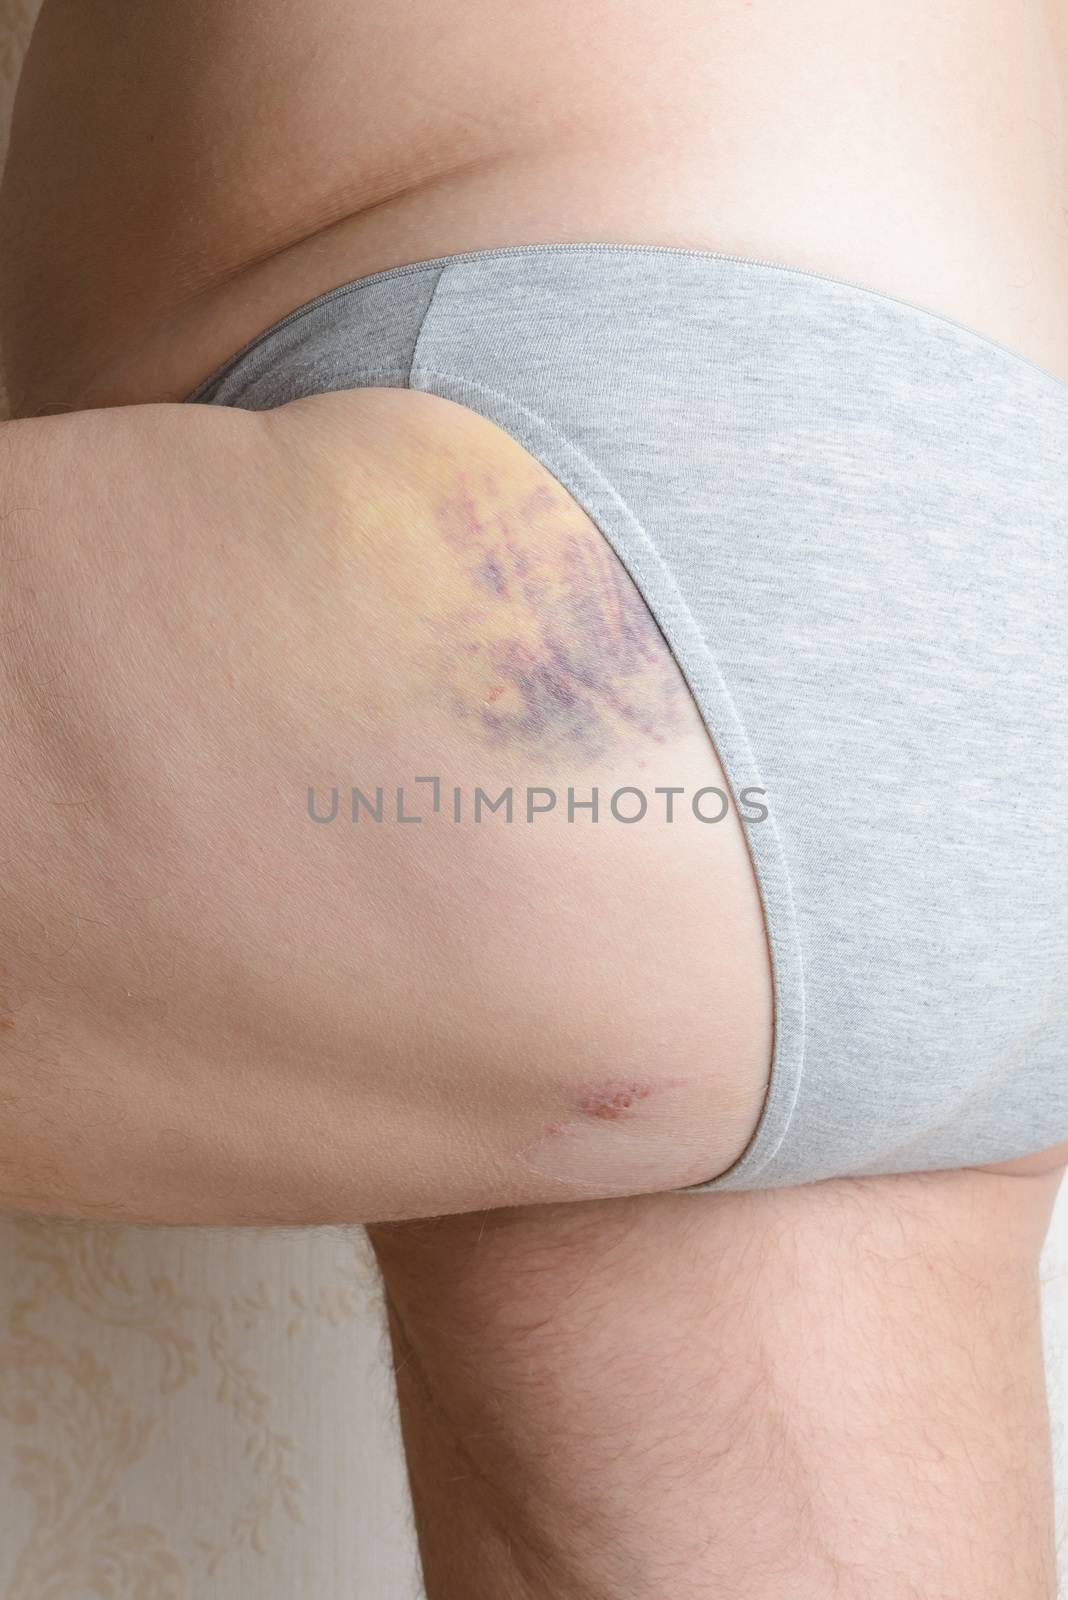 Traces of dog bite and hematoma to the buttock by MaxalTamor